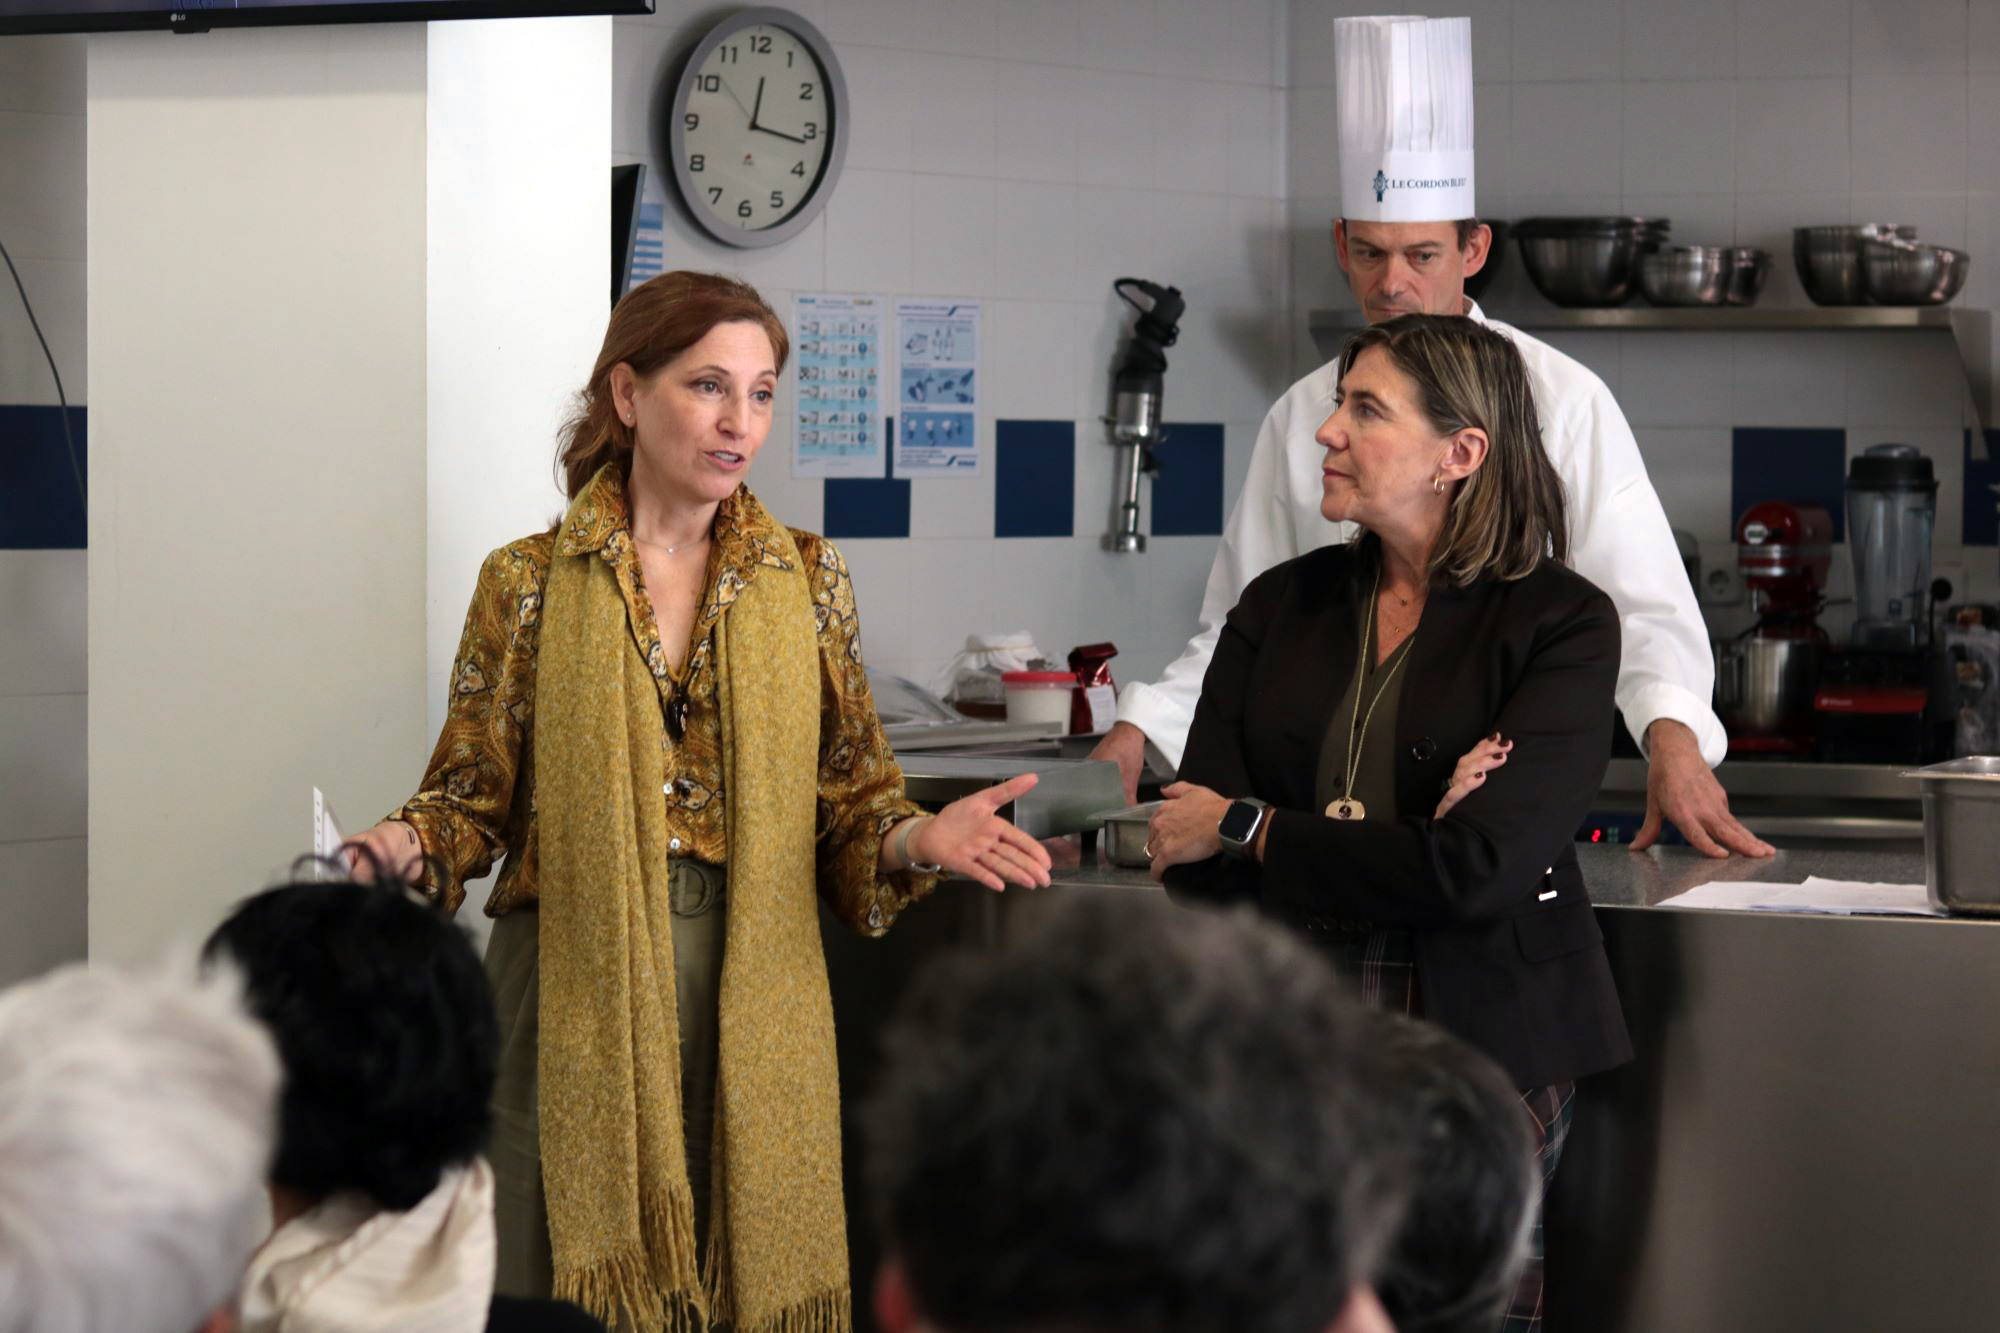 Le Cordon Bleu Madrid organizes a masterclass for oncology patients and families with the help of the MD Anderson Cancer Center Spain Foundation